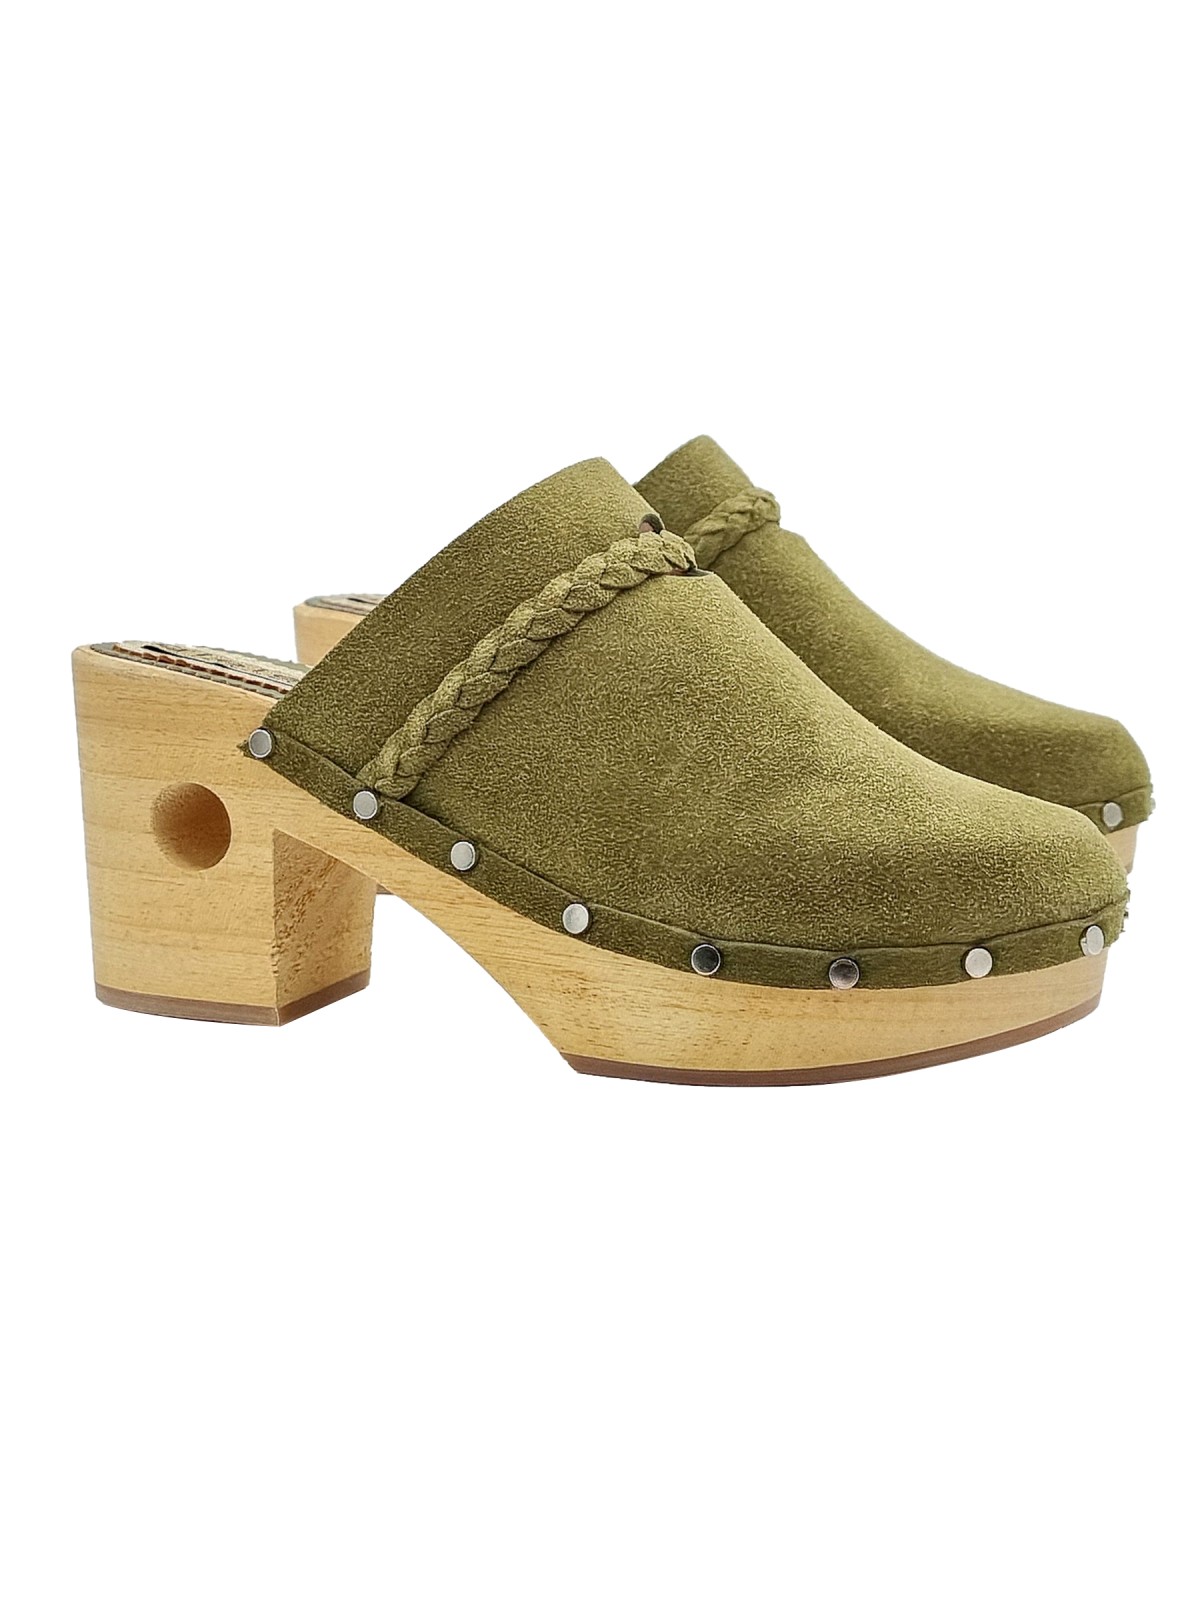 GREEN SUEDE CLOGS WITH 8 CM HEEL